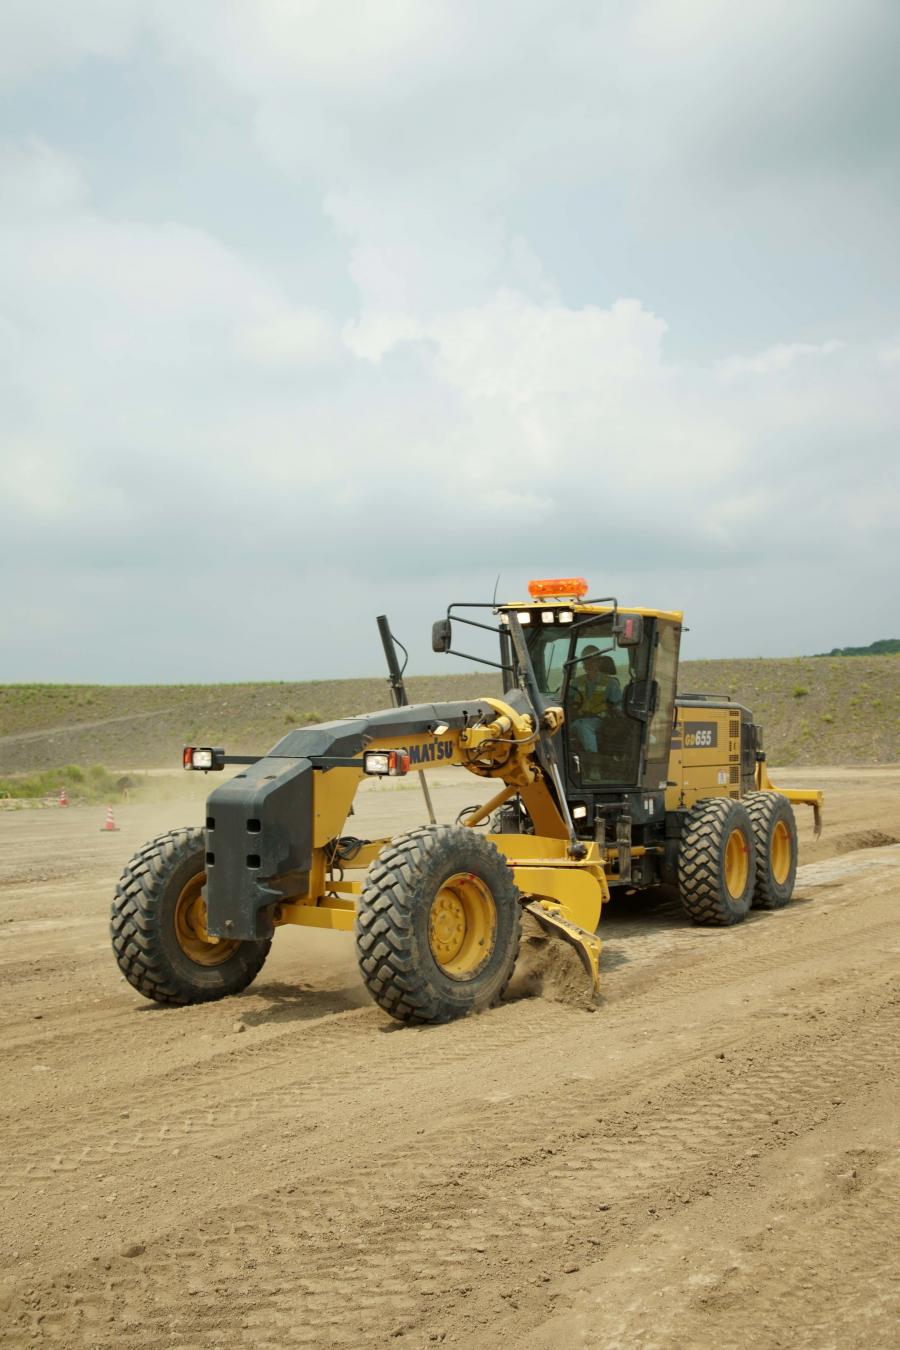 The GD655-7 provides operators with an all new, ergonomic working environment and the new spacious cab allows more room for operators working long days, according to Bruce Boebel, senior product manager, Komatsu America.